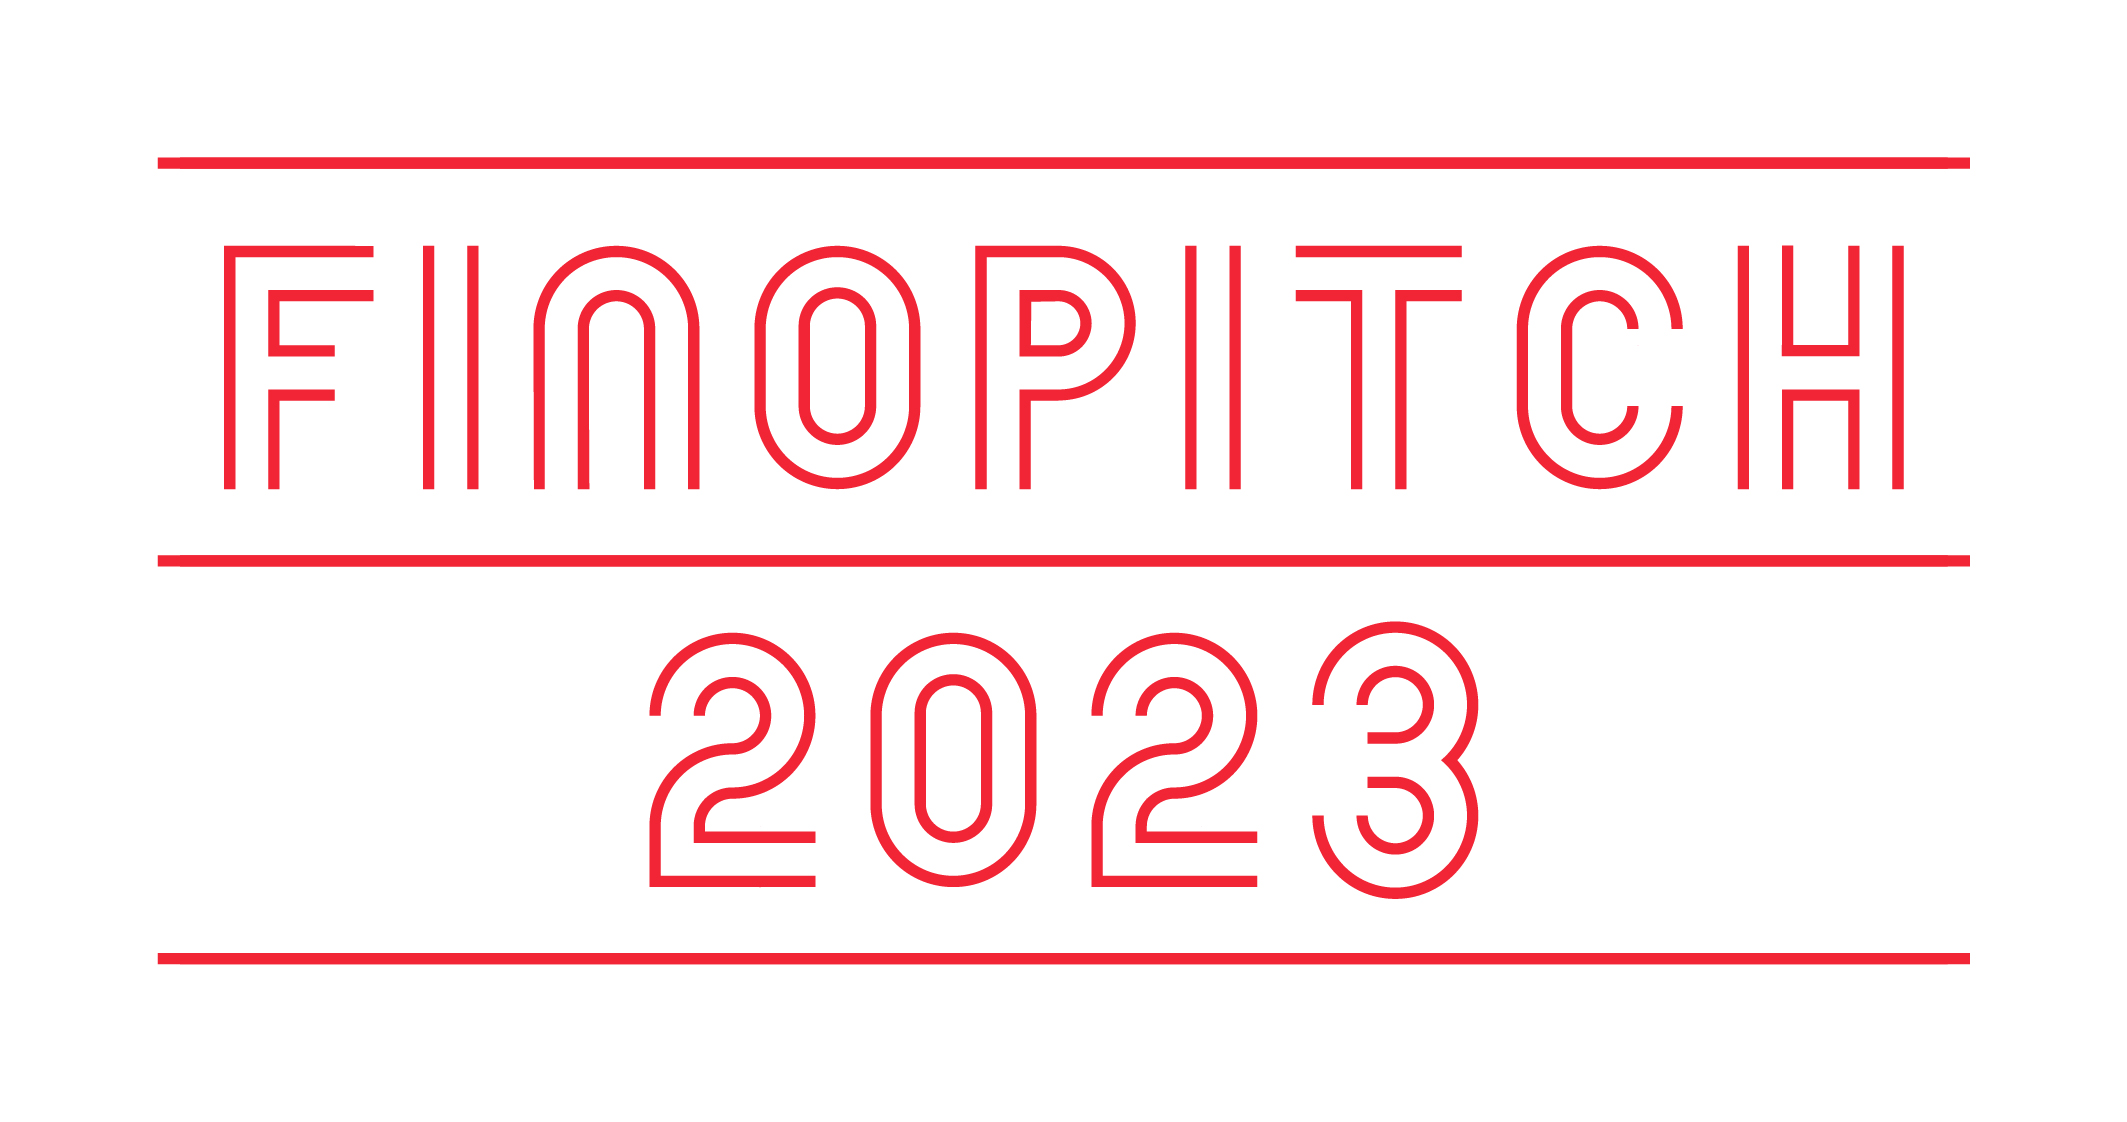 “FINOPITCH 2023” is open for entry! The deadline for application is January 10th，2023